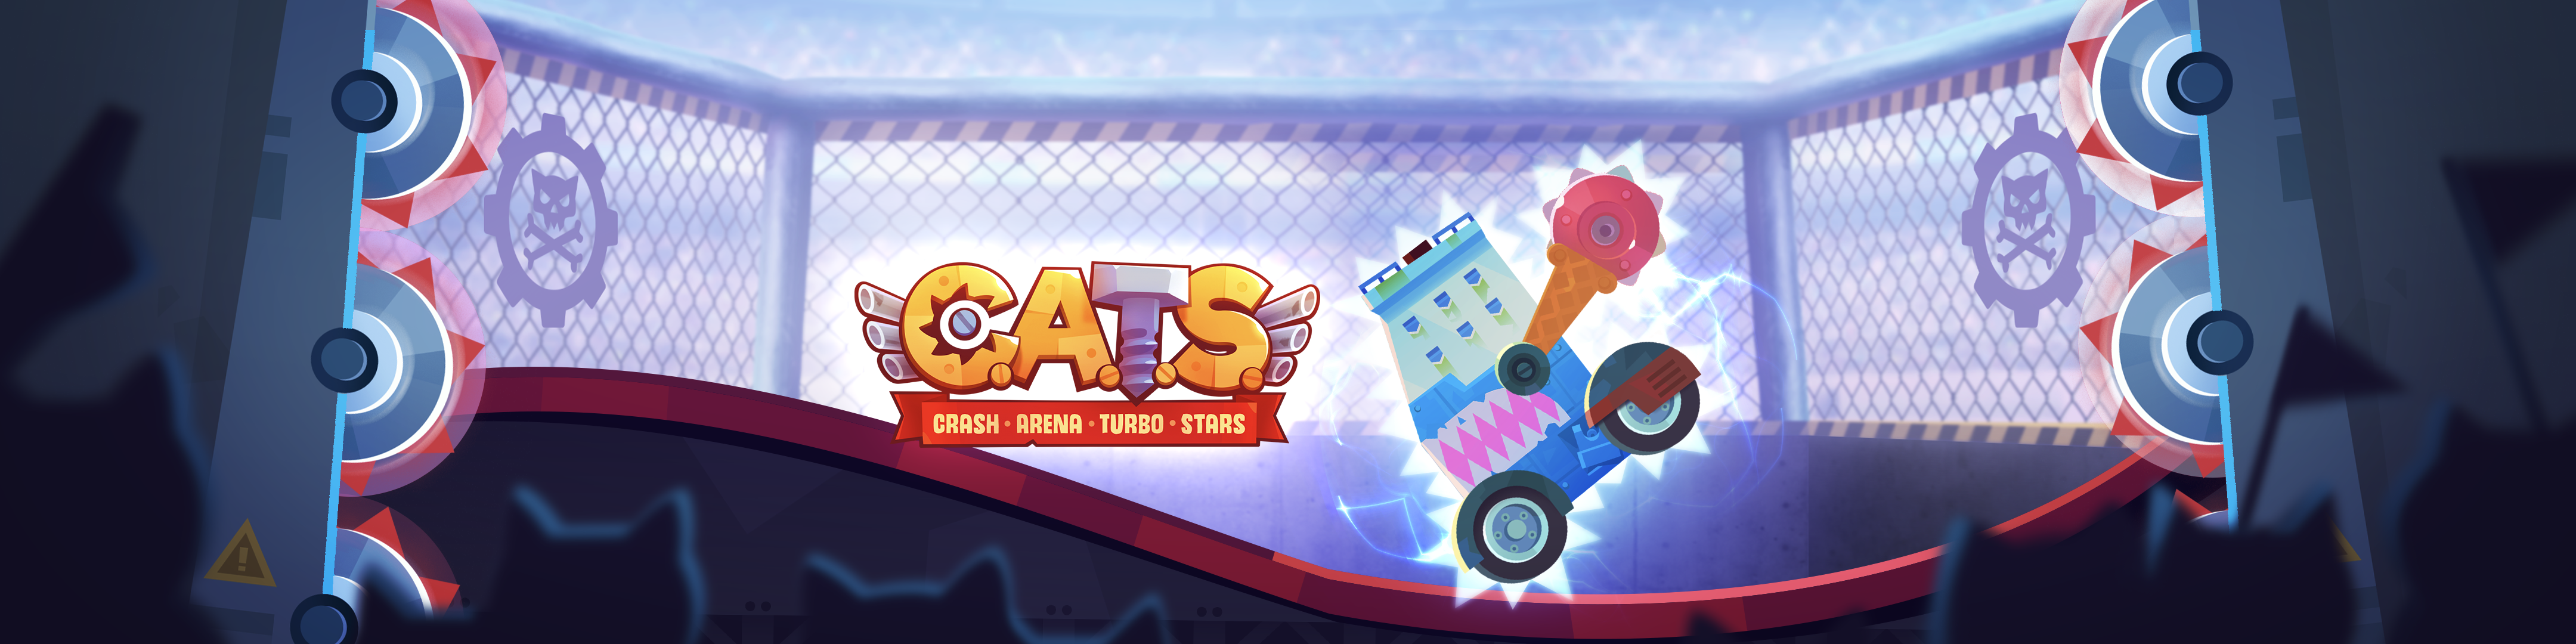 cats crash arena turbo stars play now without downloading